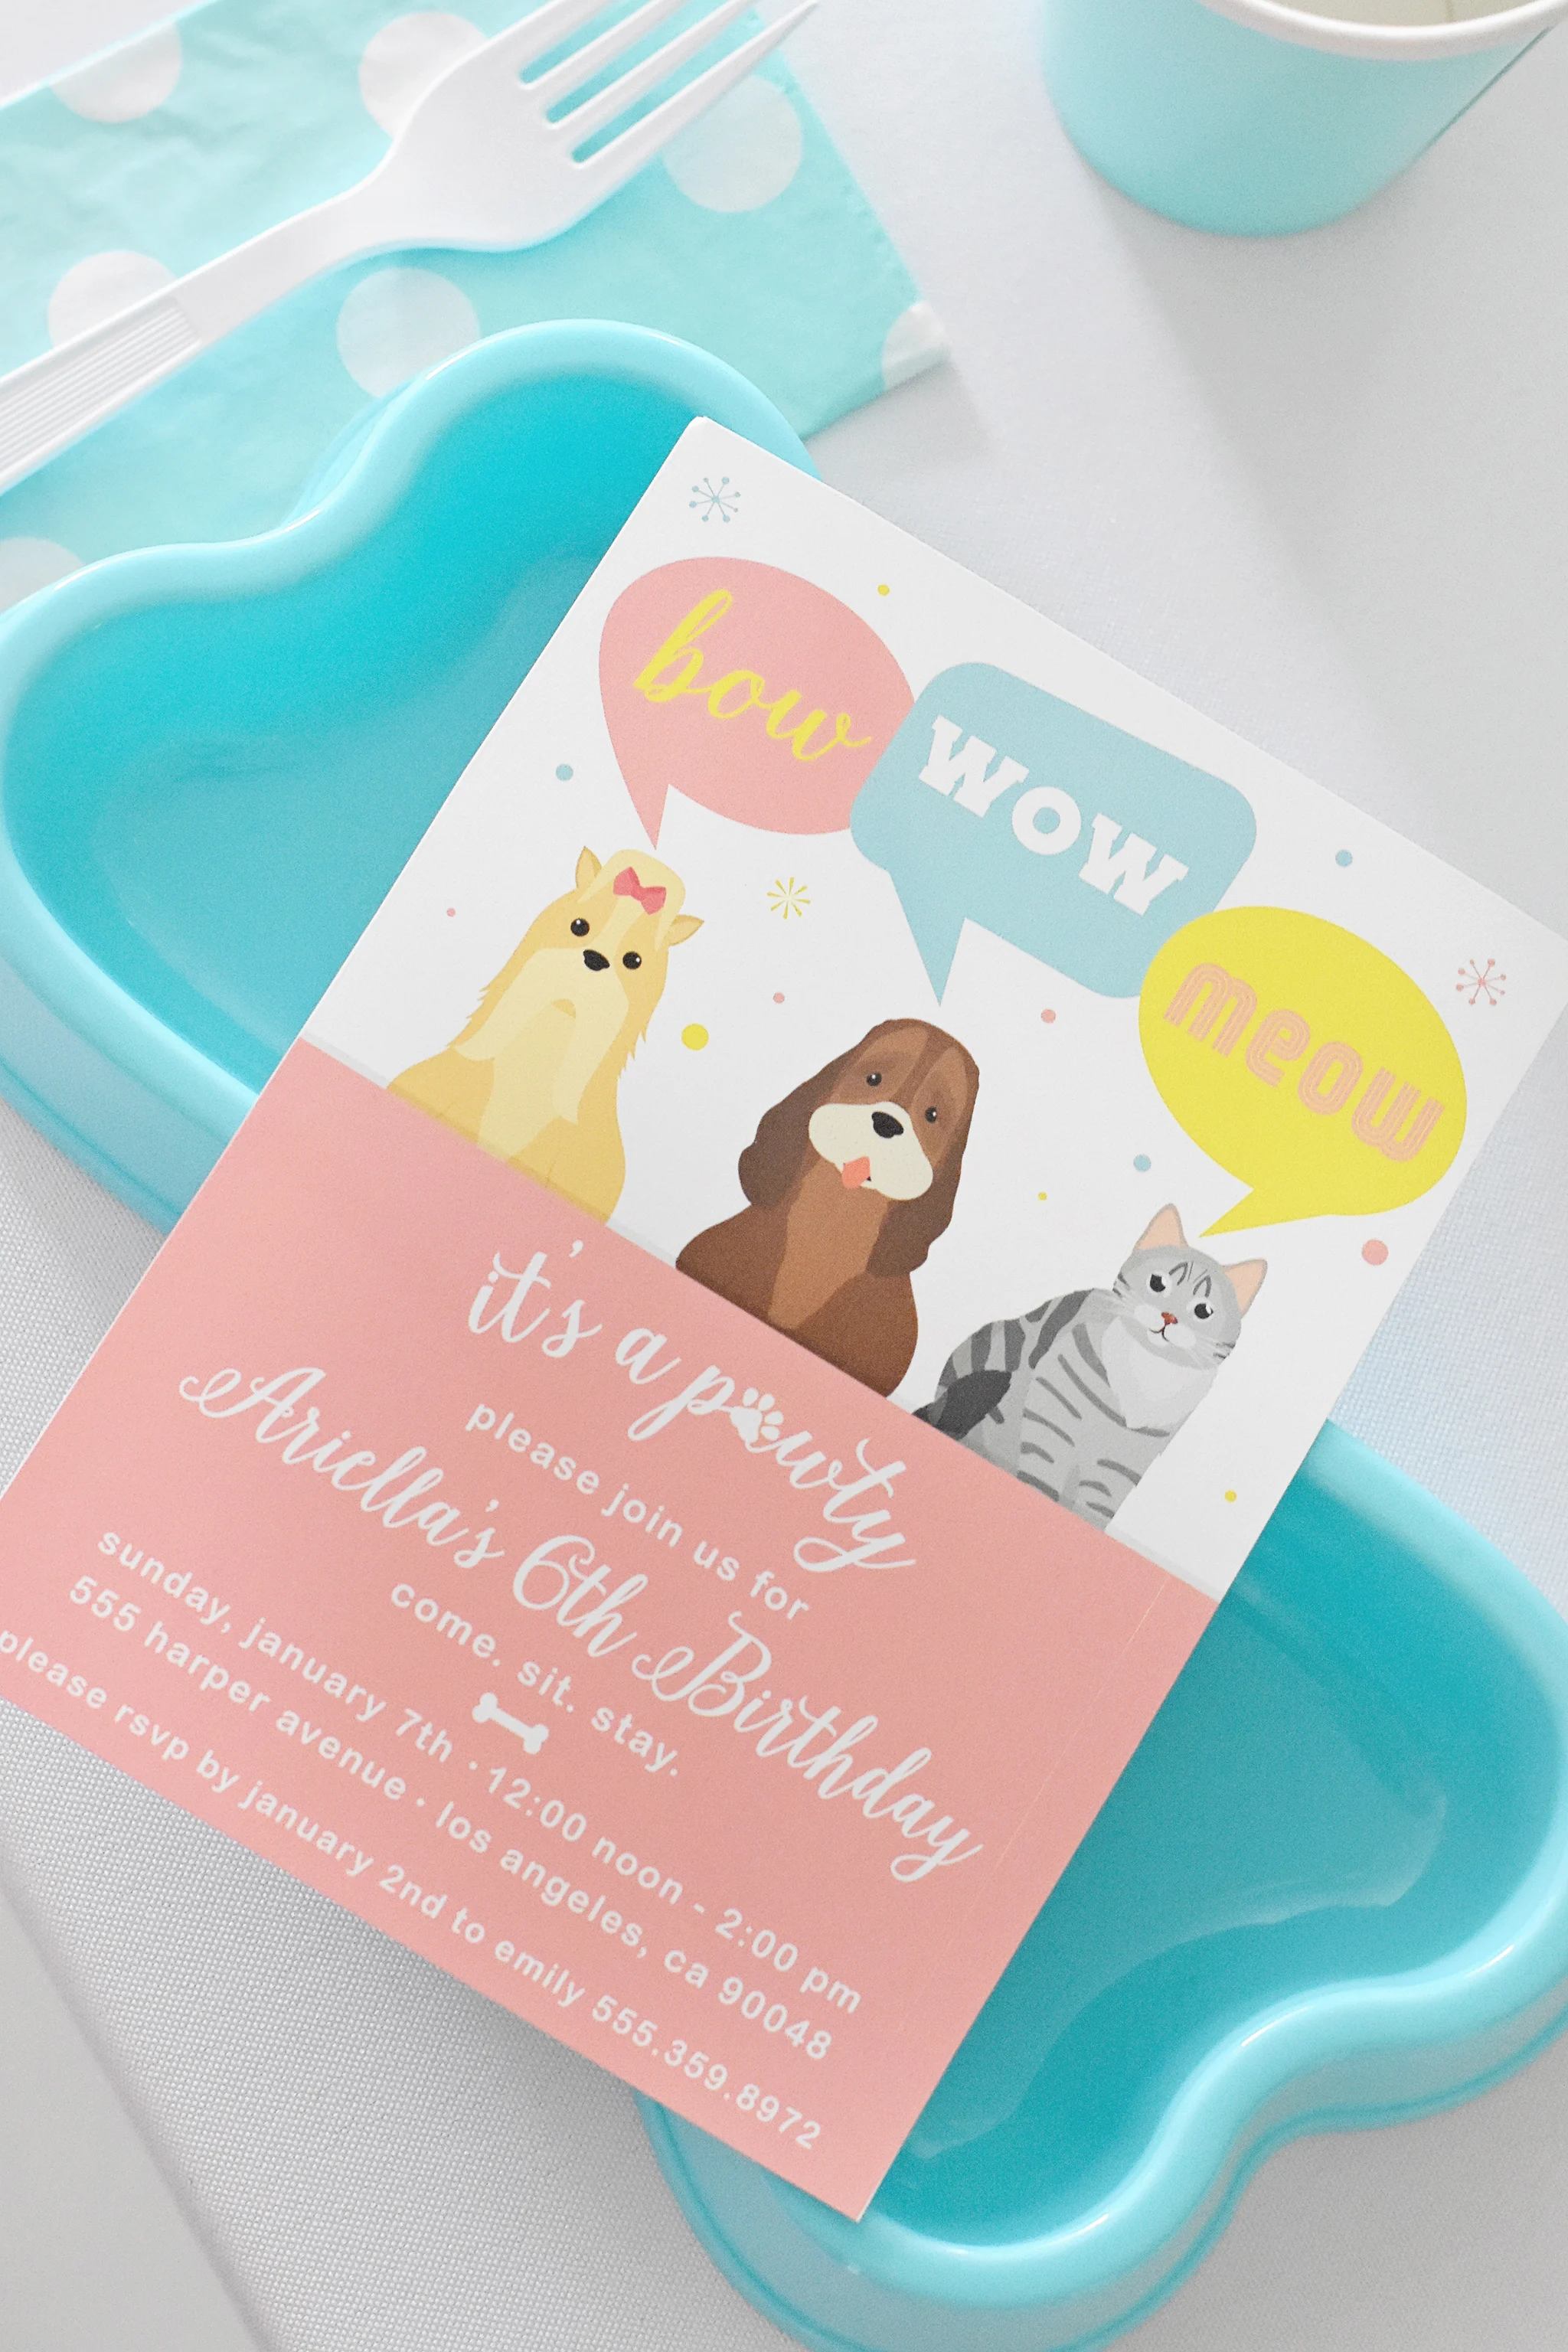 Set the tone with gorgeous party invitations!